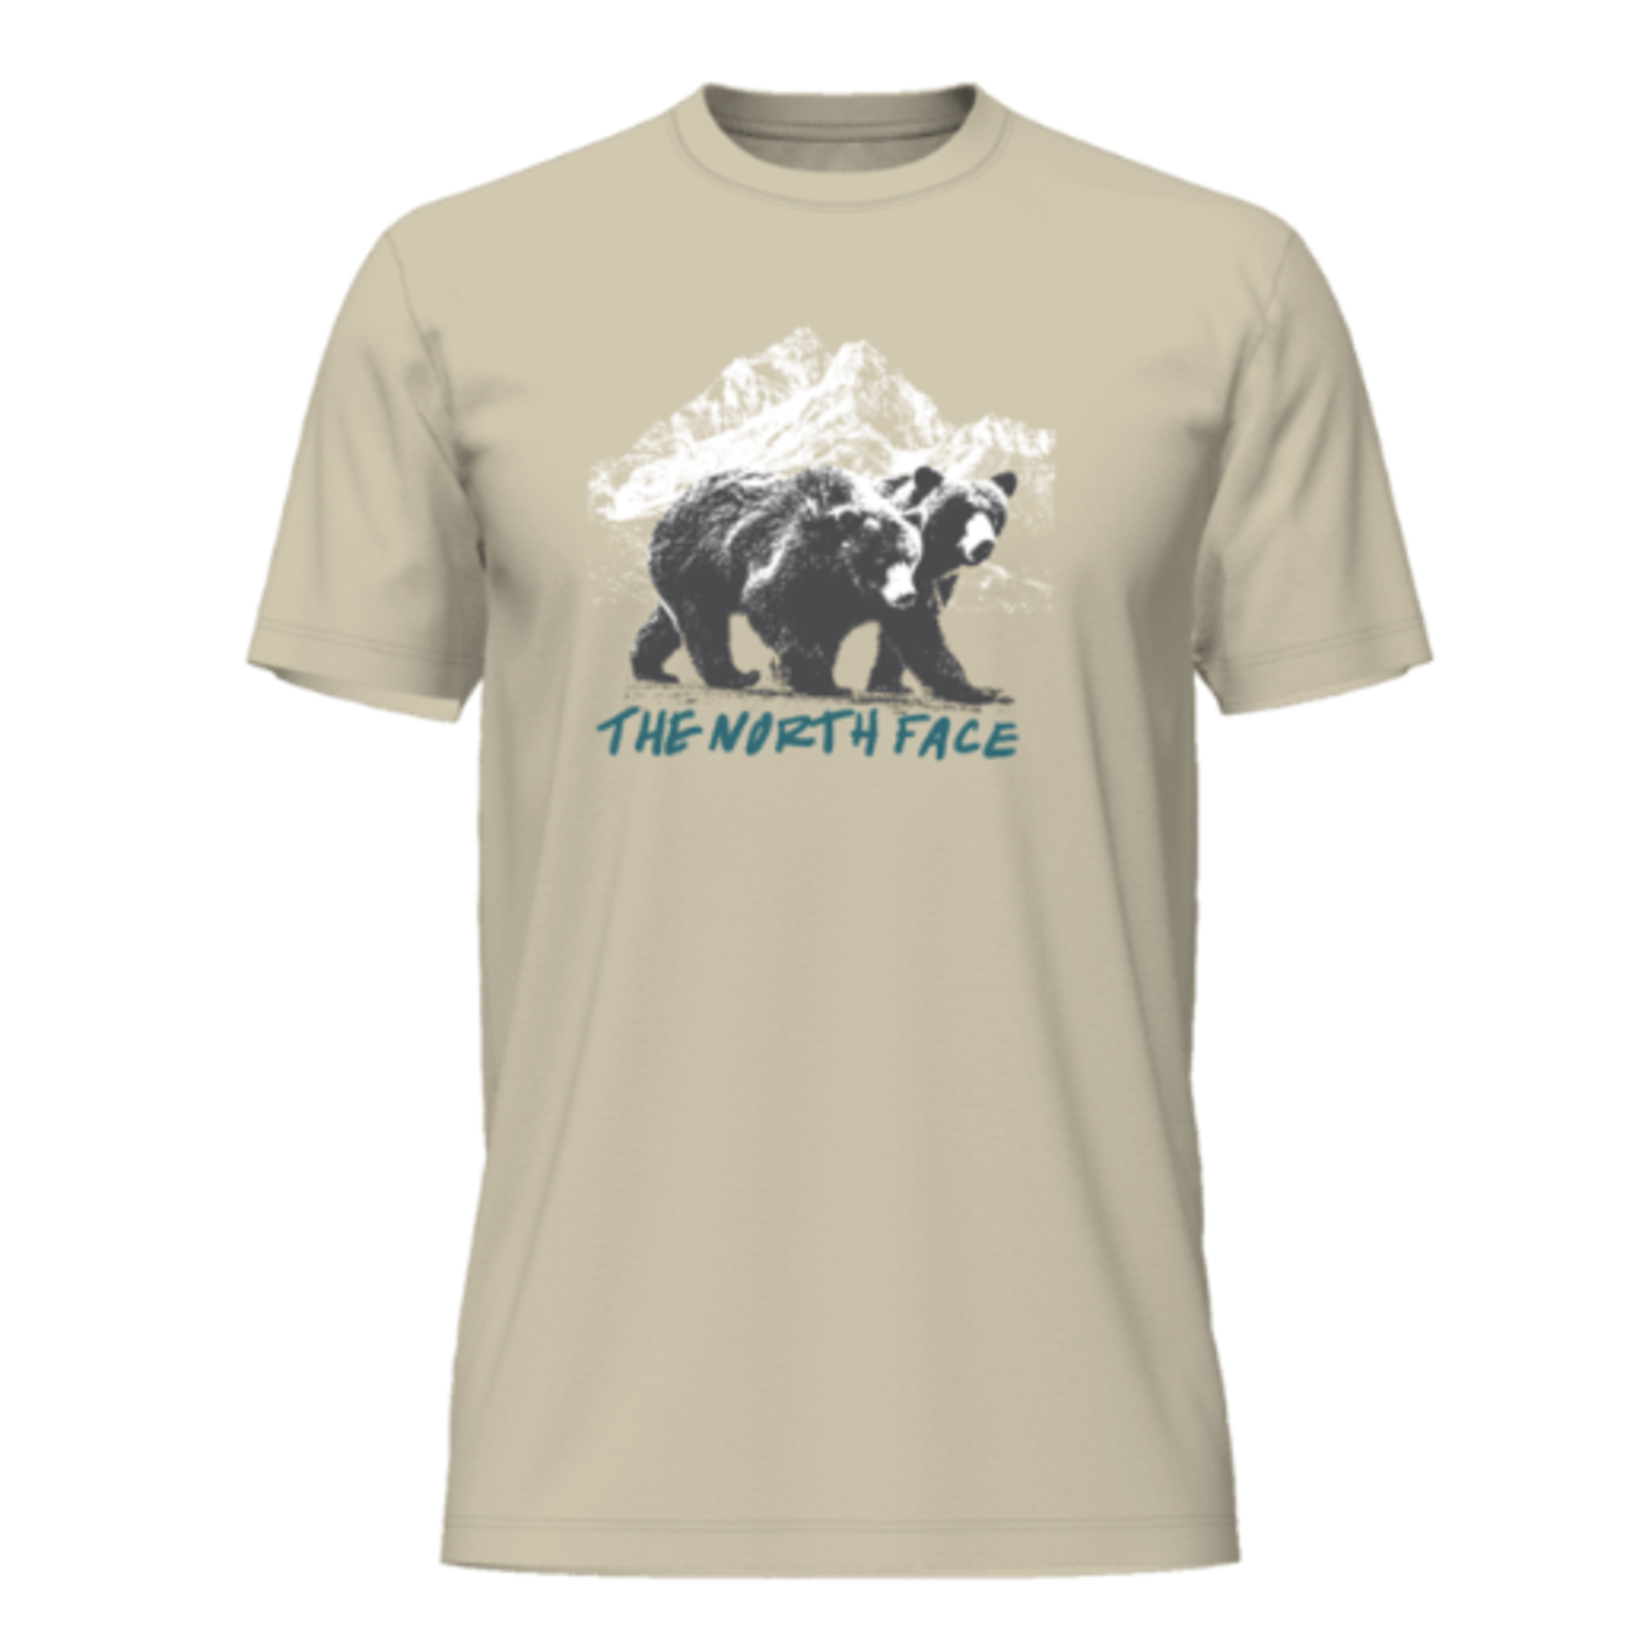 The North Face The North Face T-Shirt, S/S Bears Tee, Mens